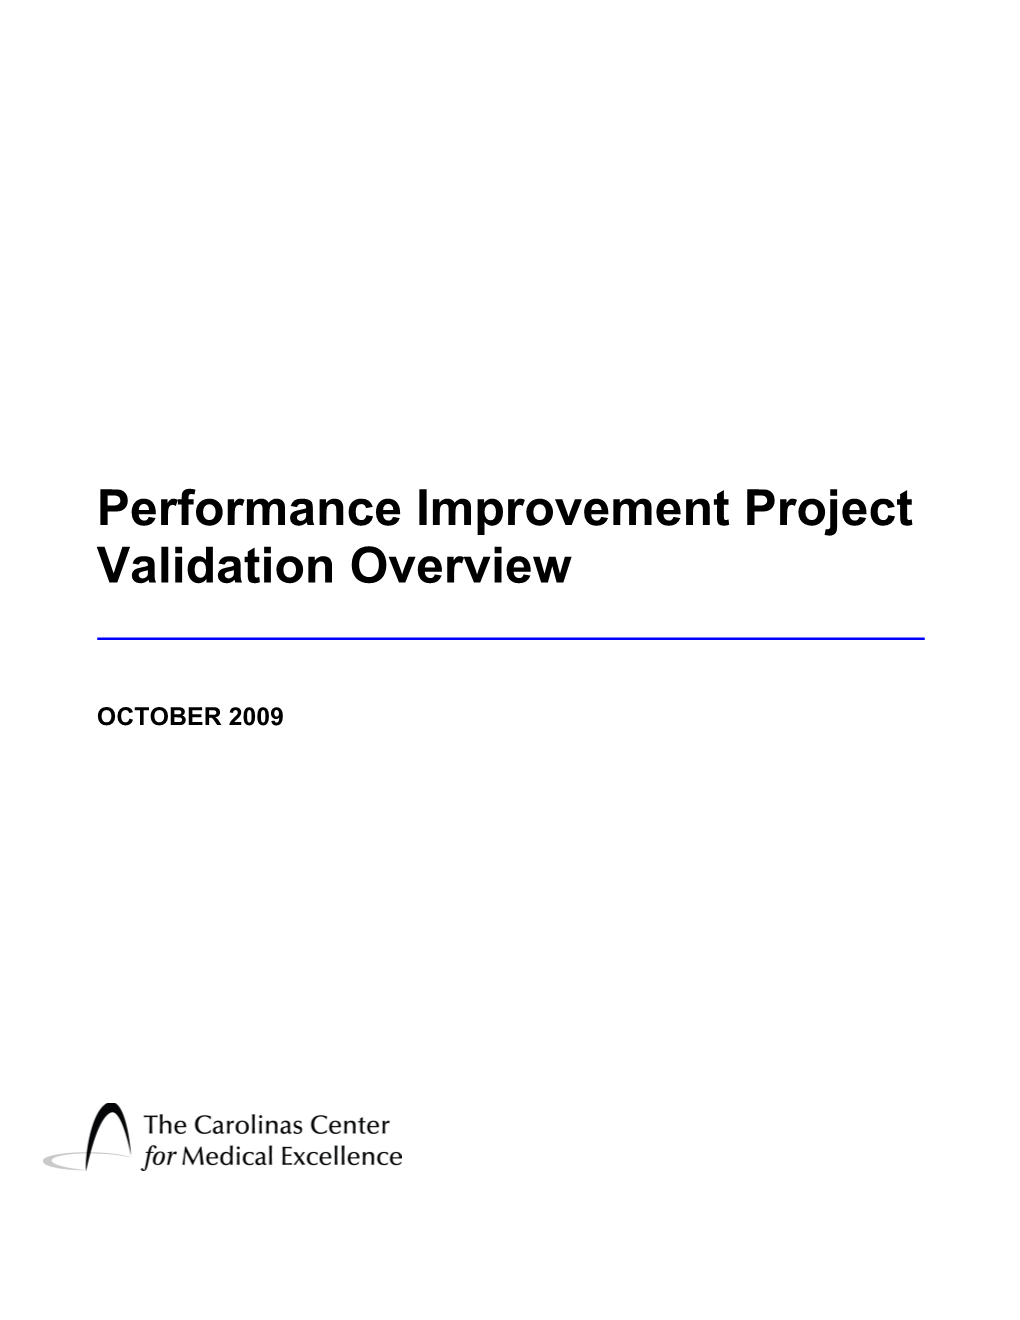 Performance Improvement Project Validation Overview